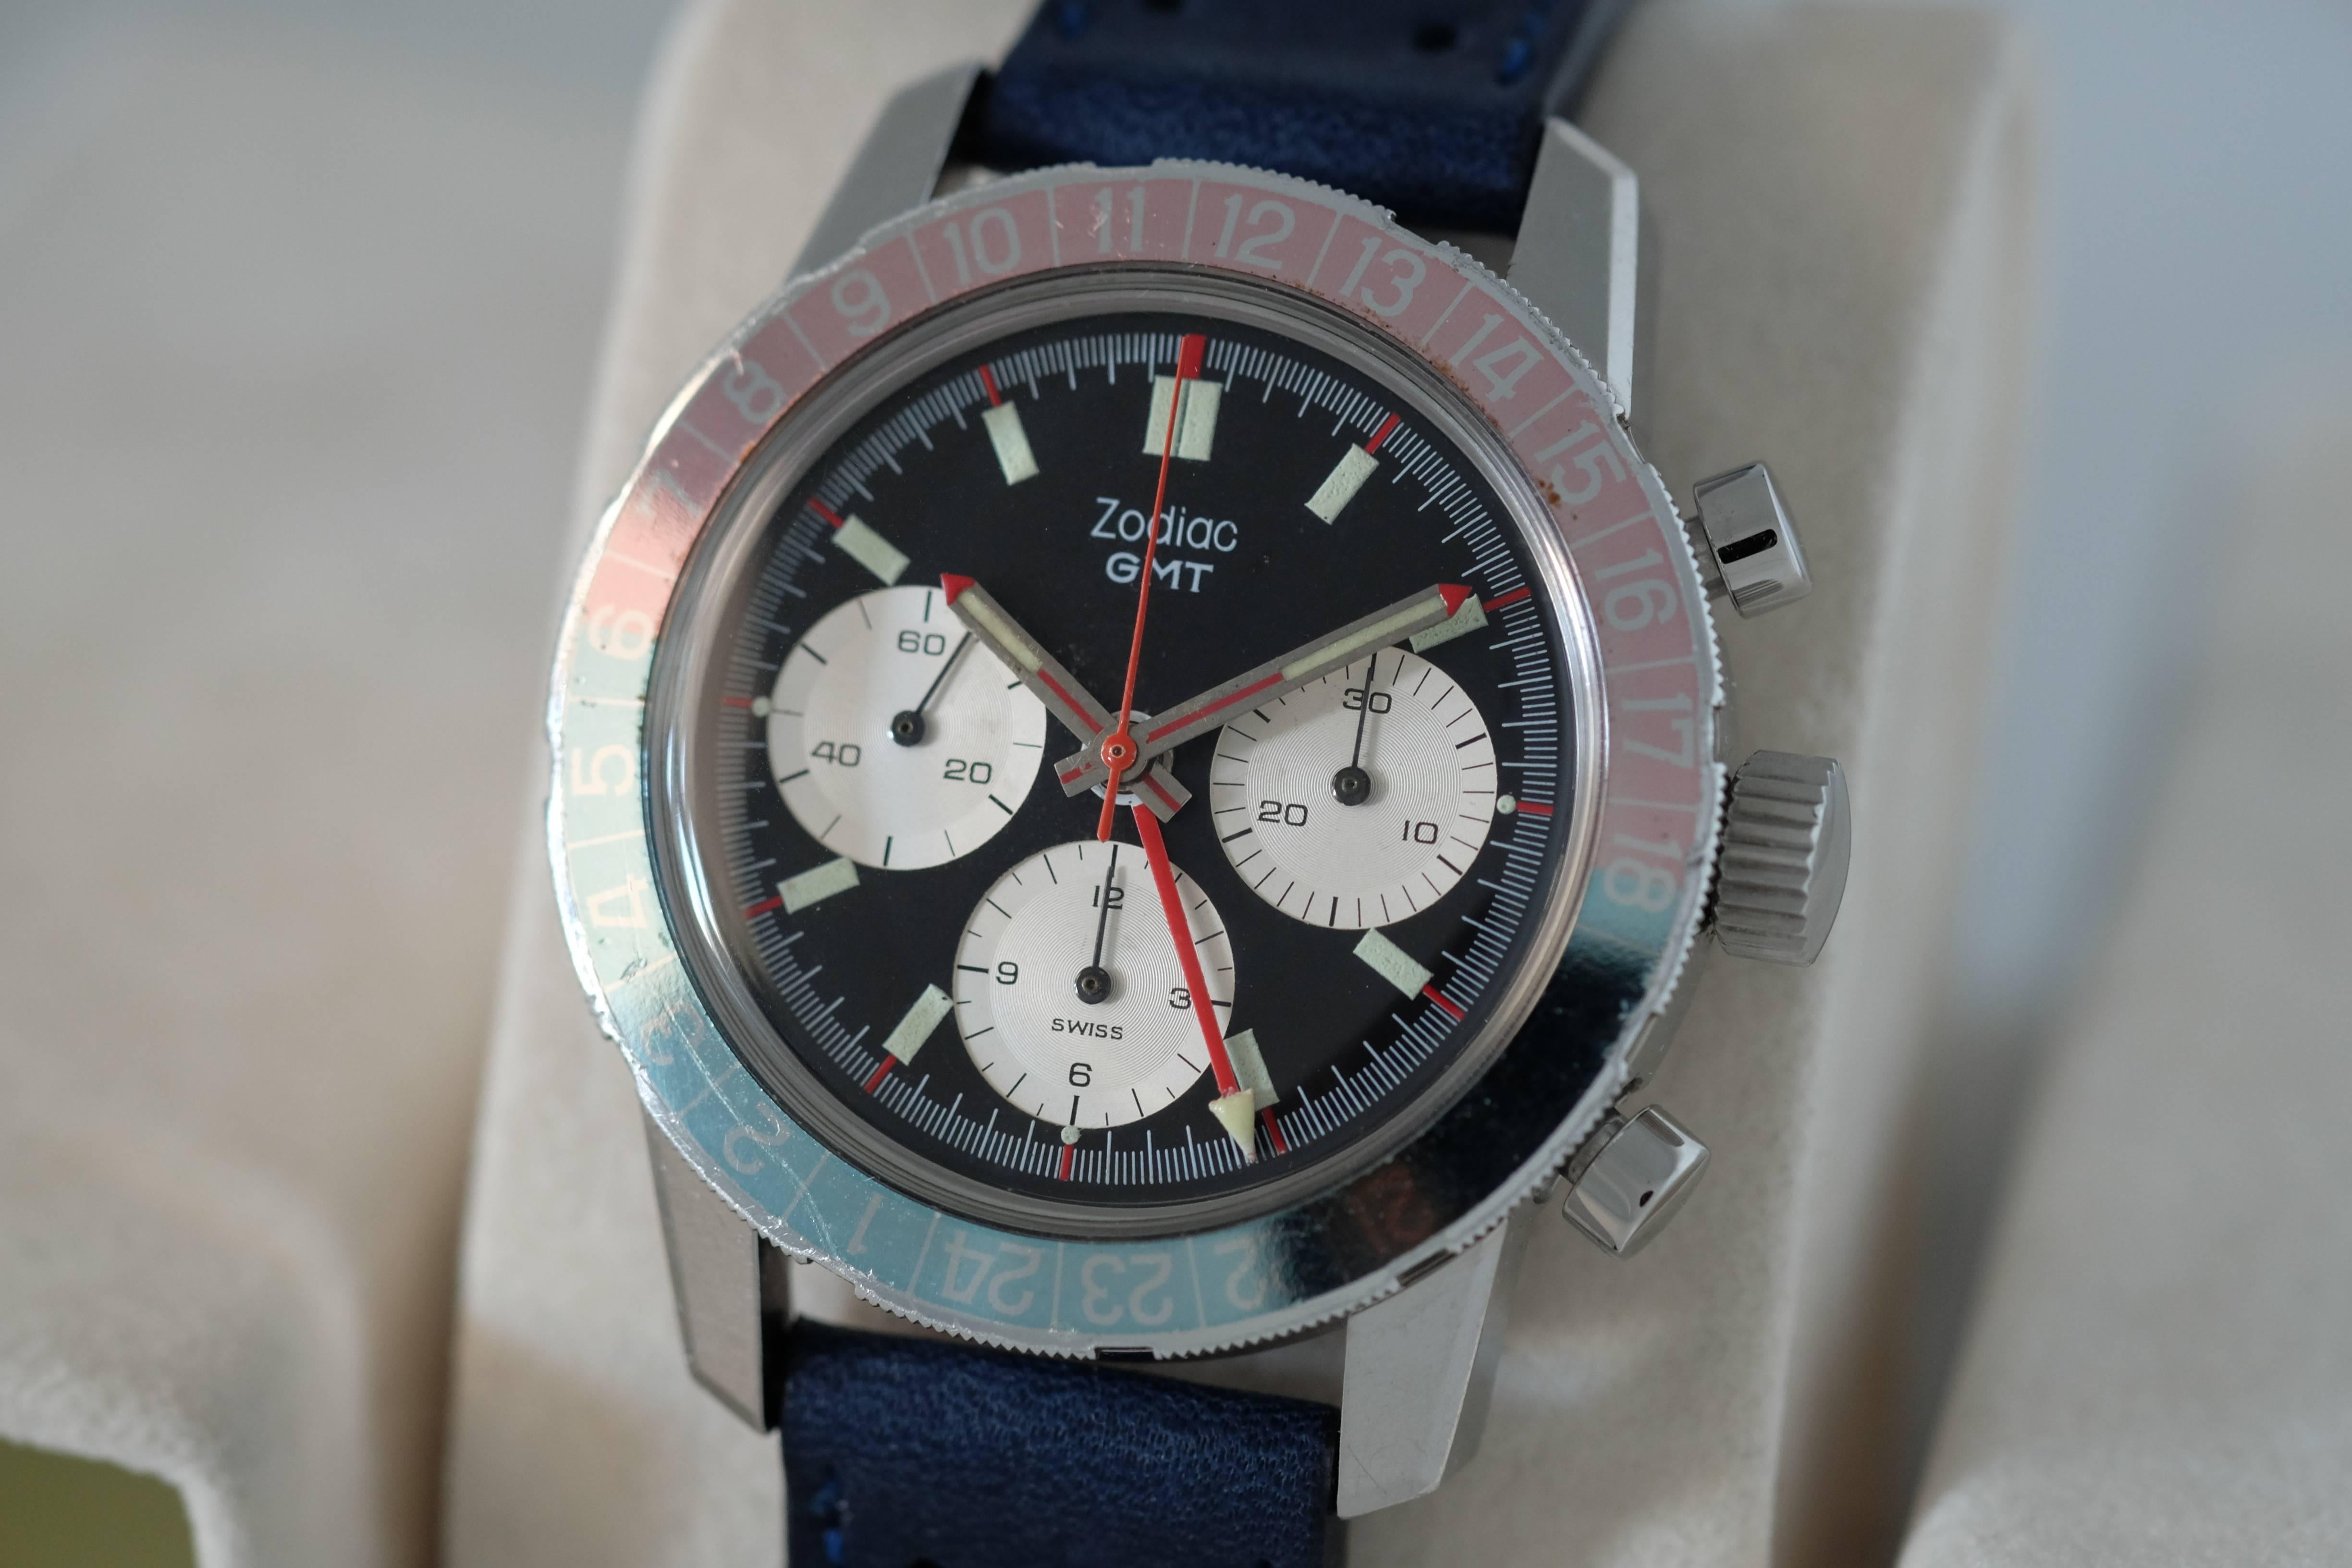 Zodiac. A Stainless Steel GMT Chronograph Wristwatch

Circa: 1970

Valjoux 724 mechanical jeweled movement, matte black dial, luminous baton numerals with outer red accents, luminous hands with red tips and accents, outer minute divisions,